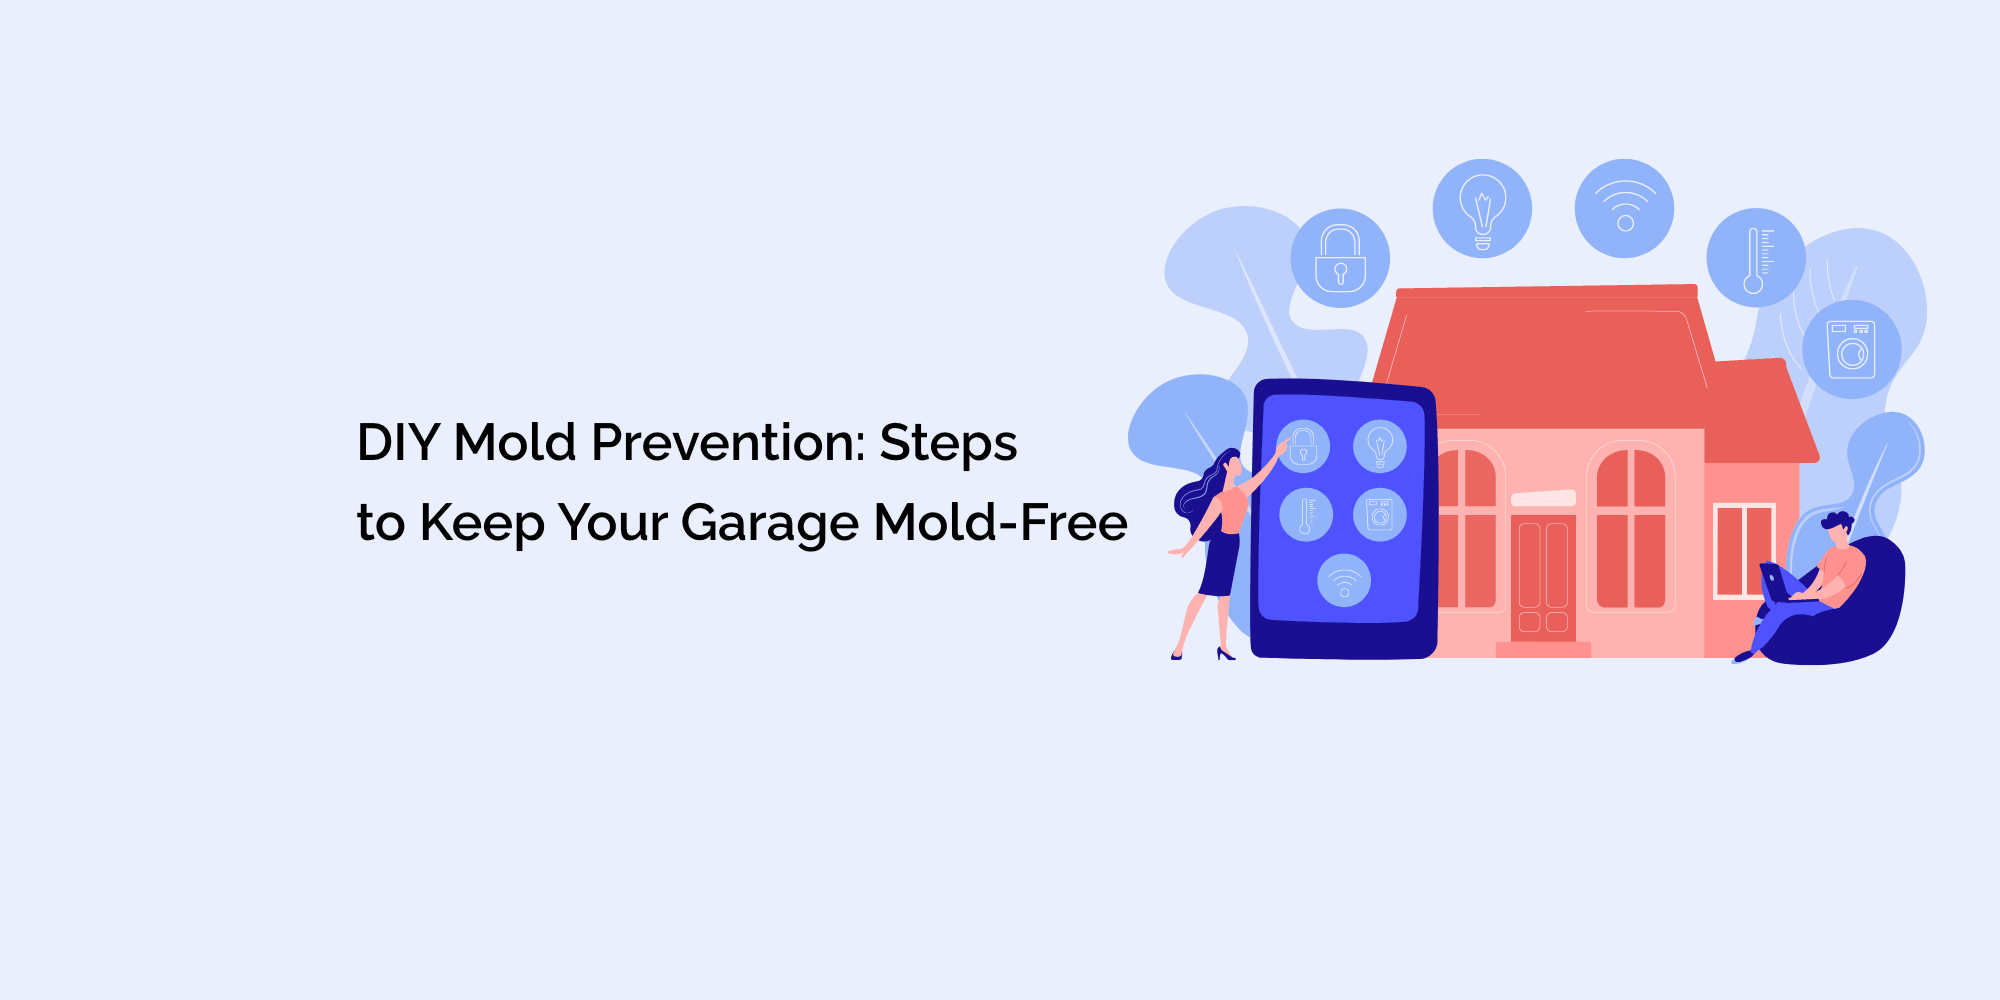 DIY Mold Prevention: Steps to Keep Your Garage Mold-Free